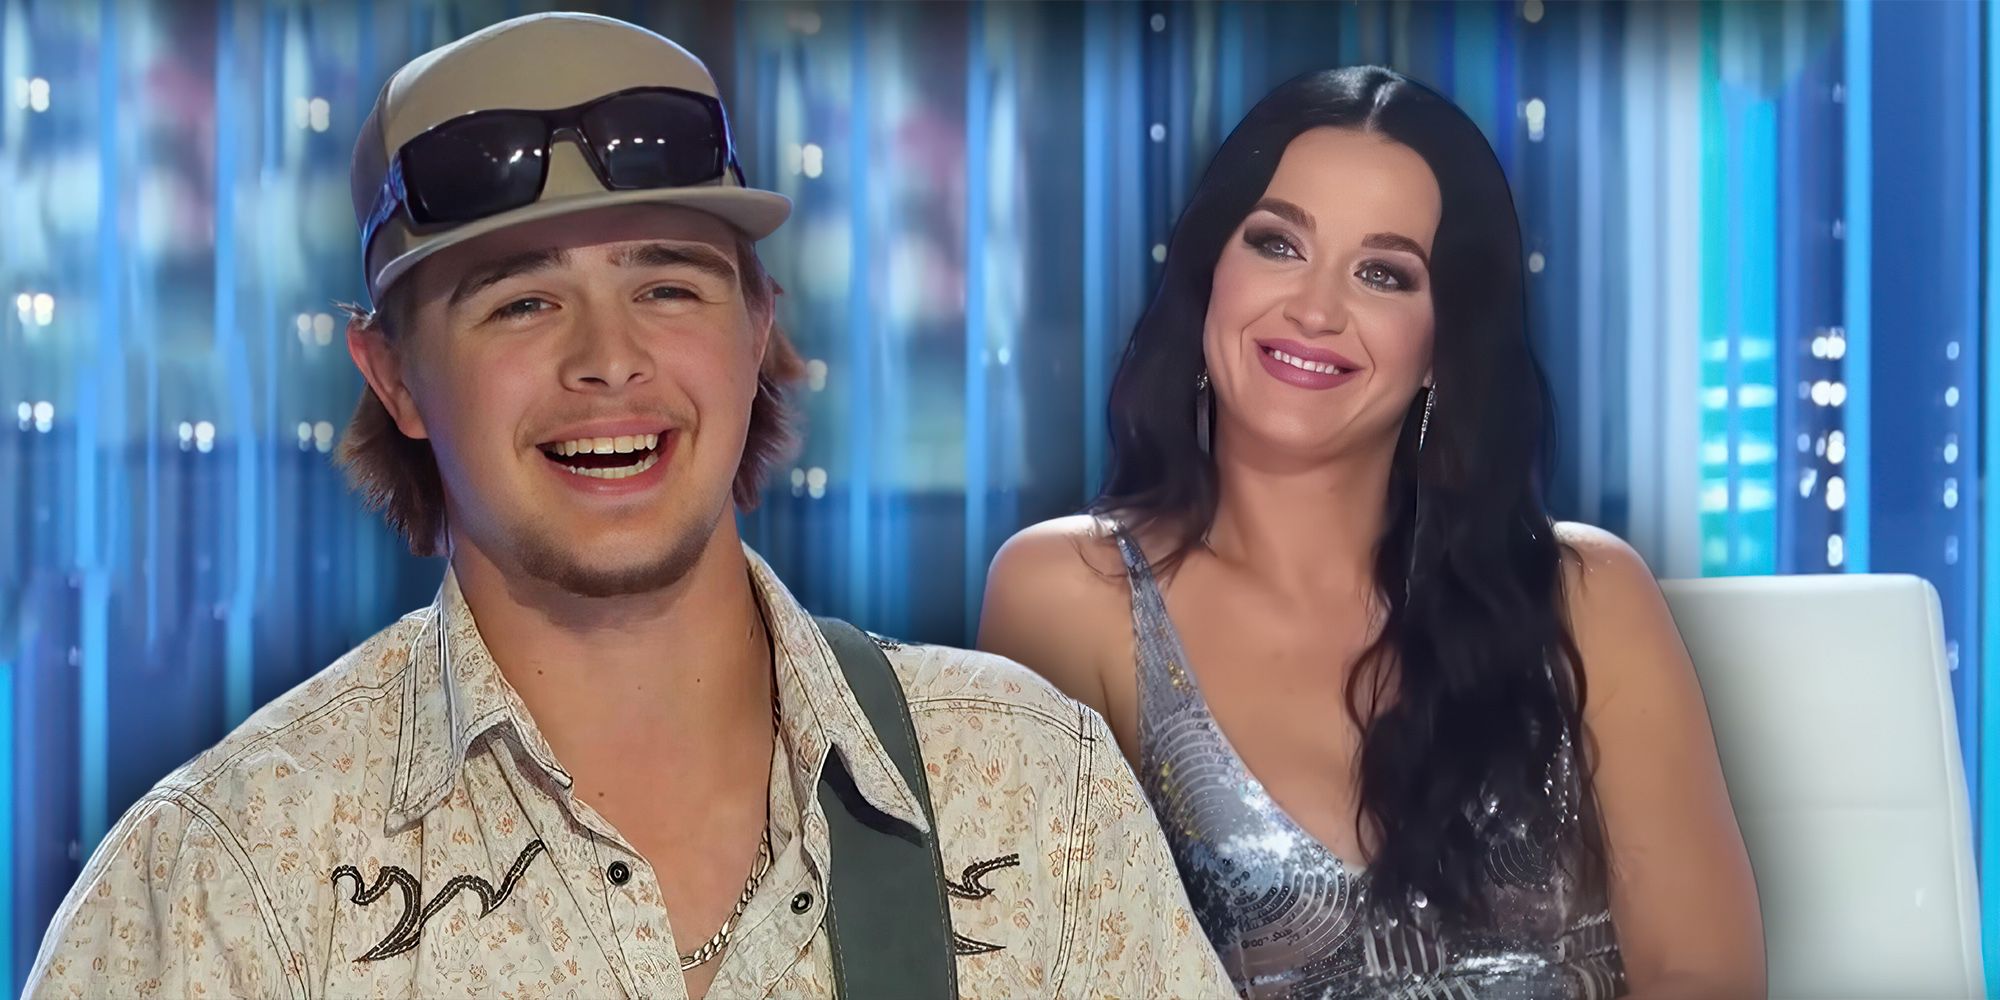 American Idol's Colin Stough and Katy Perry smiling